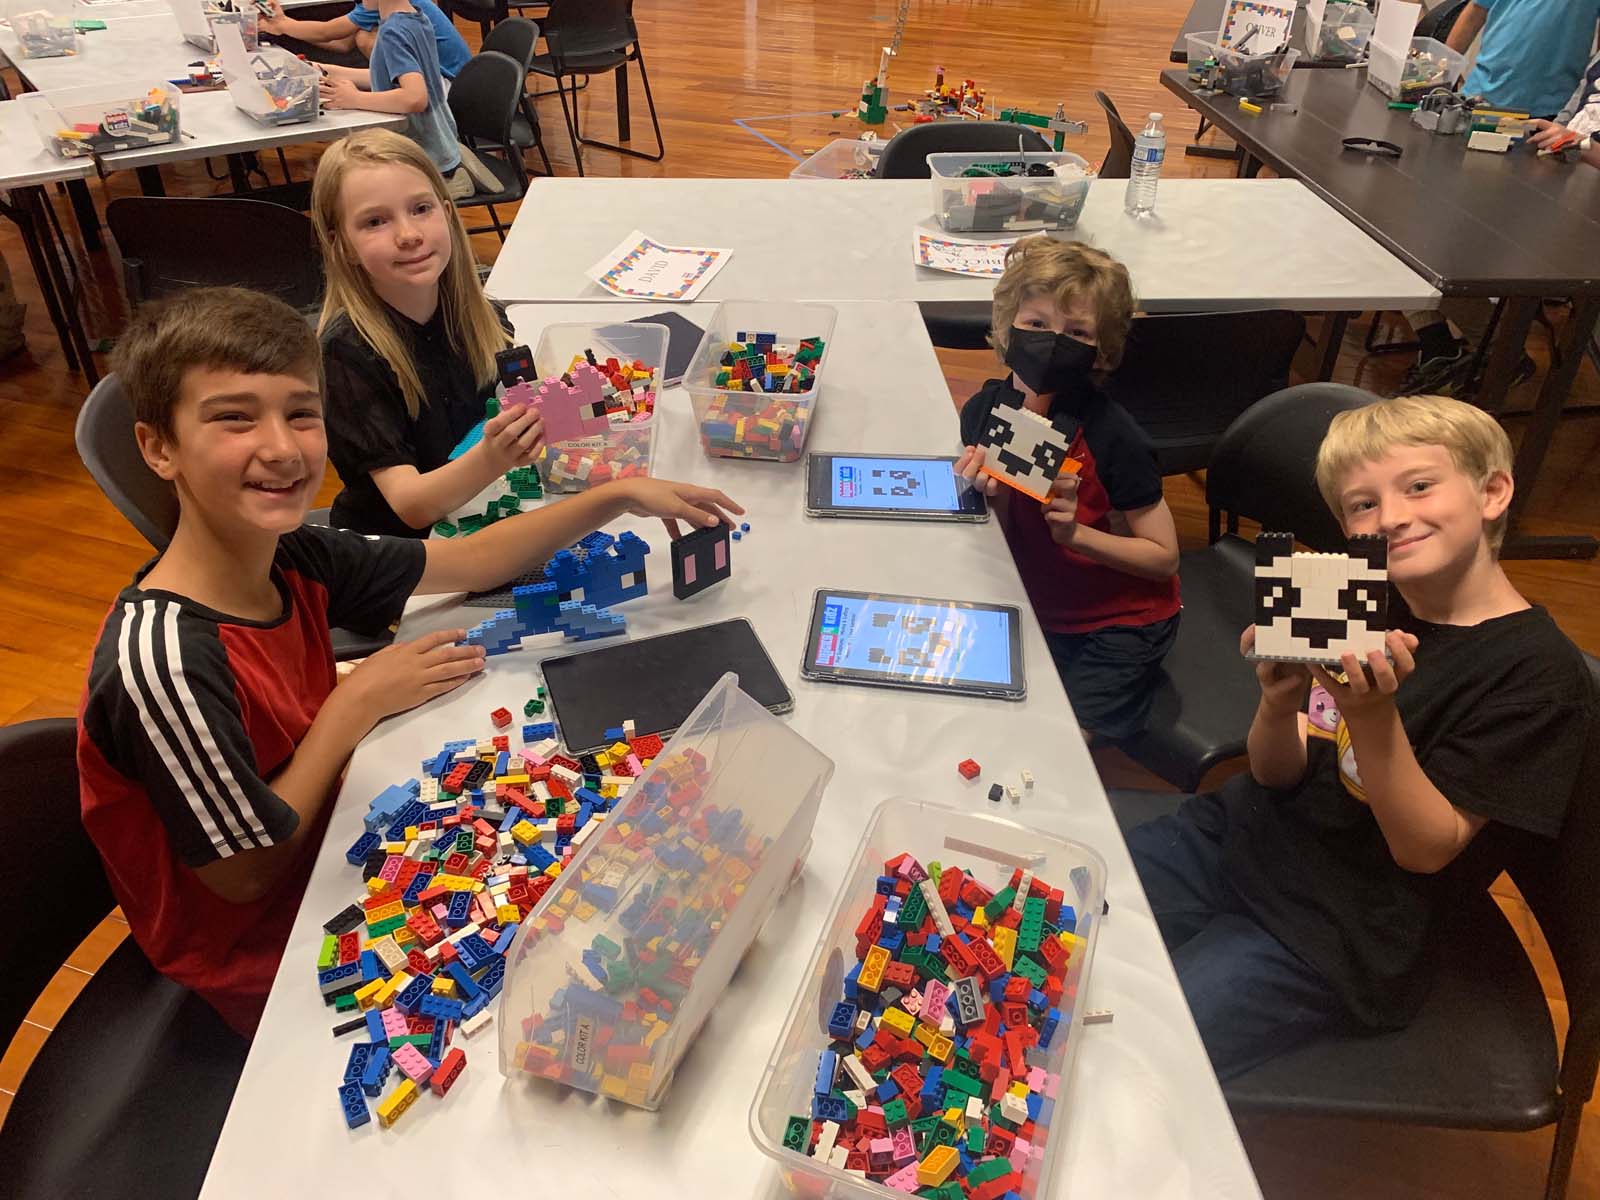 Kids Building with LEGO Bricks at Camp